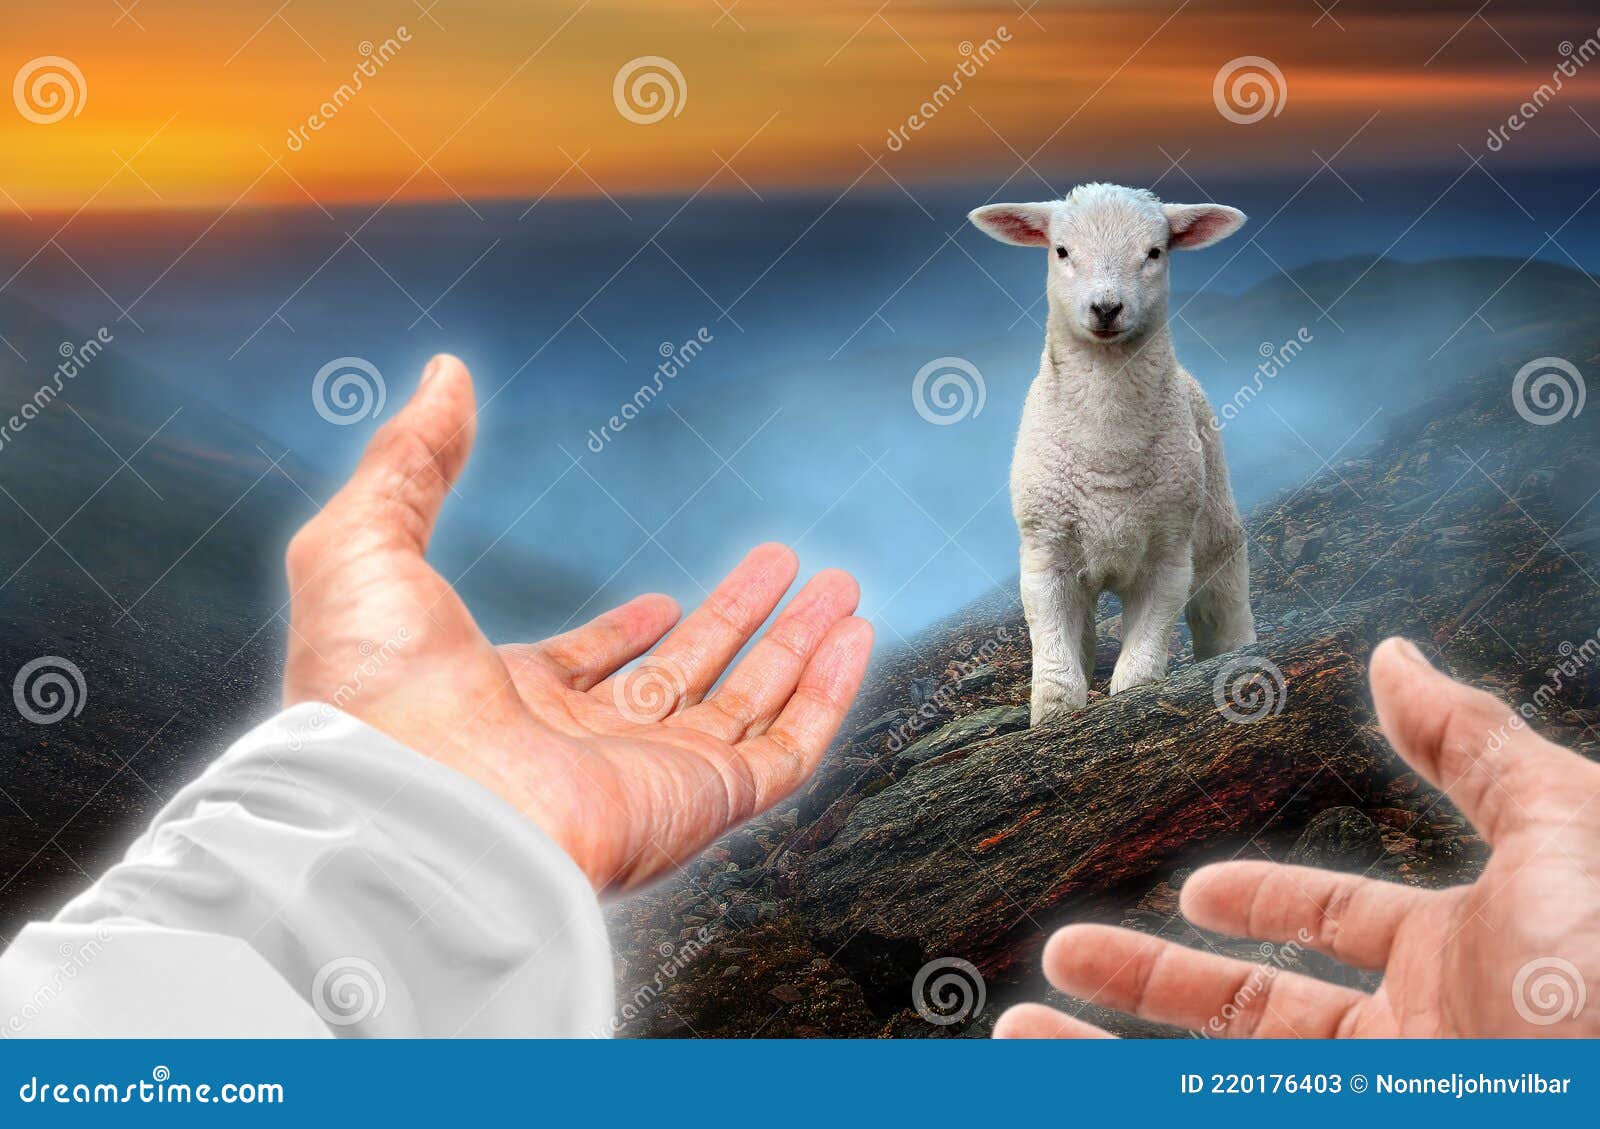 hands of god reaching out to a lost sheep